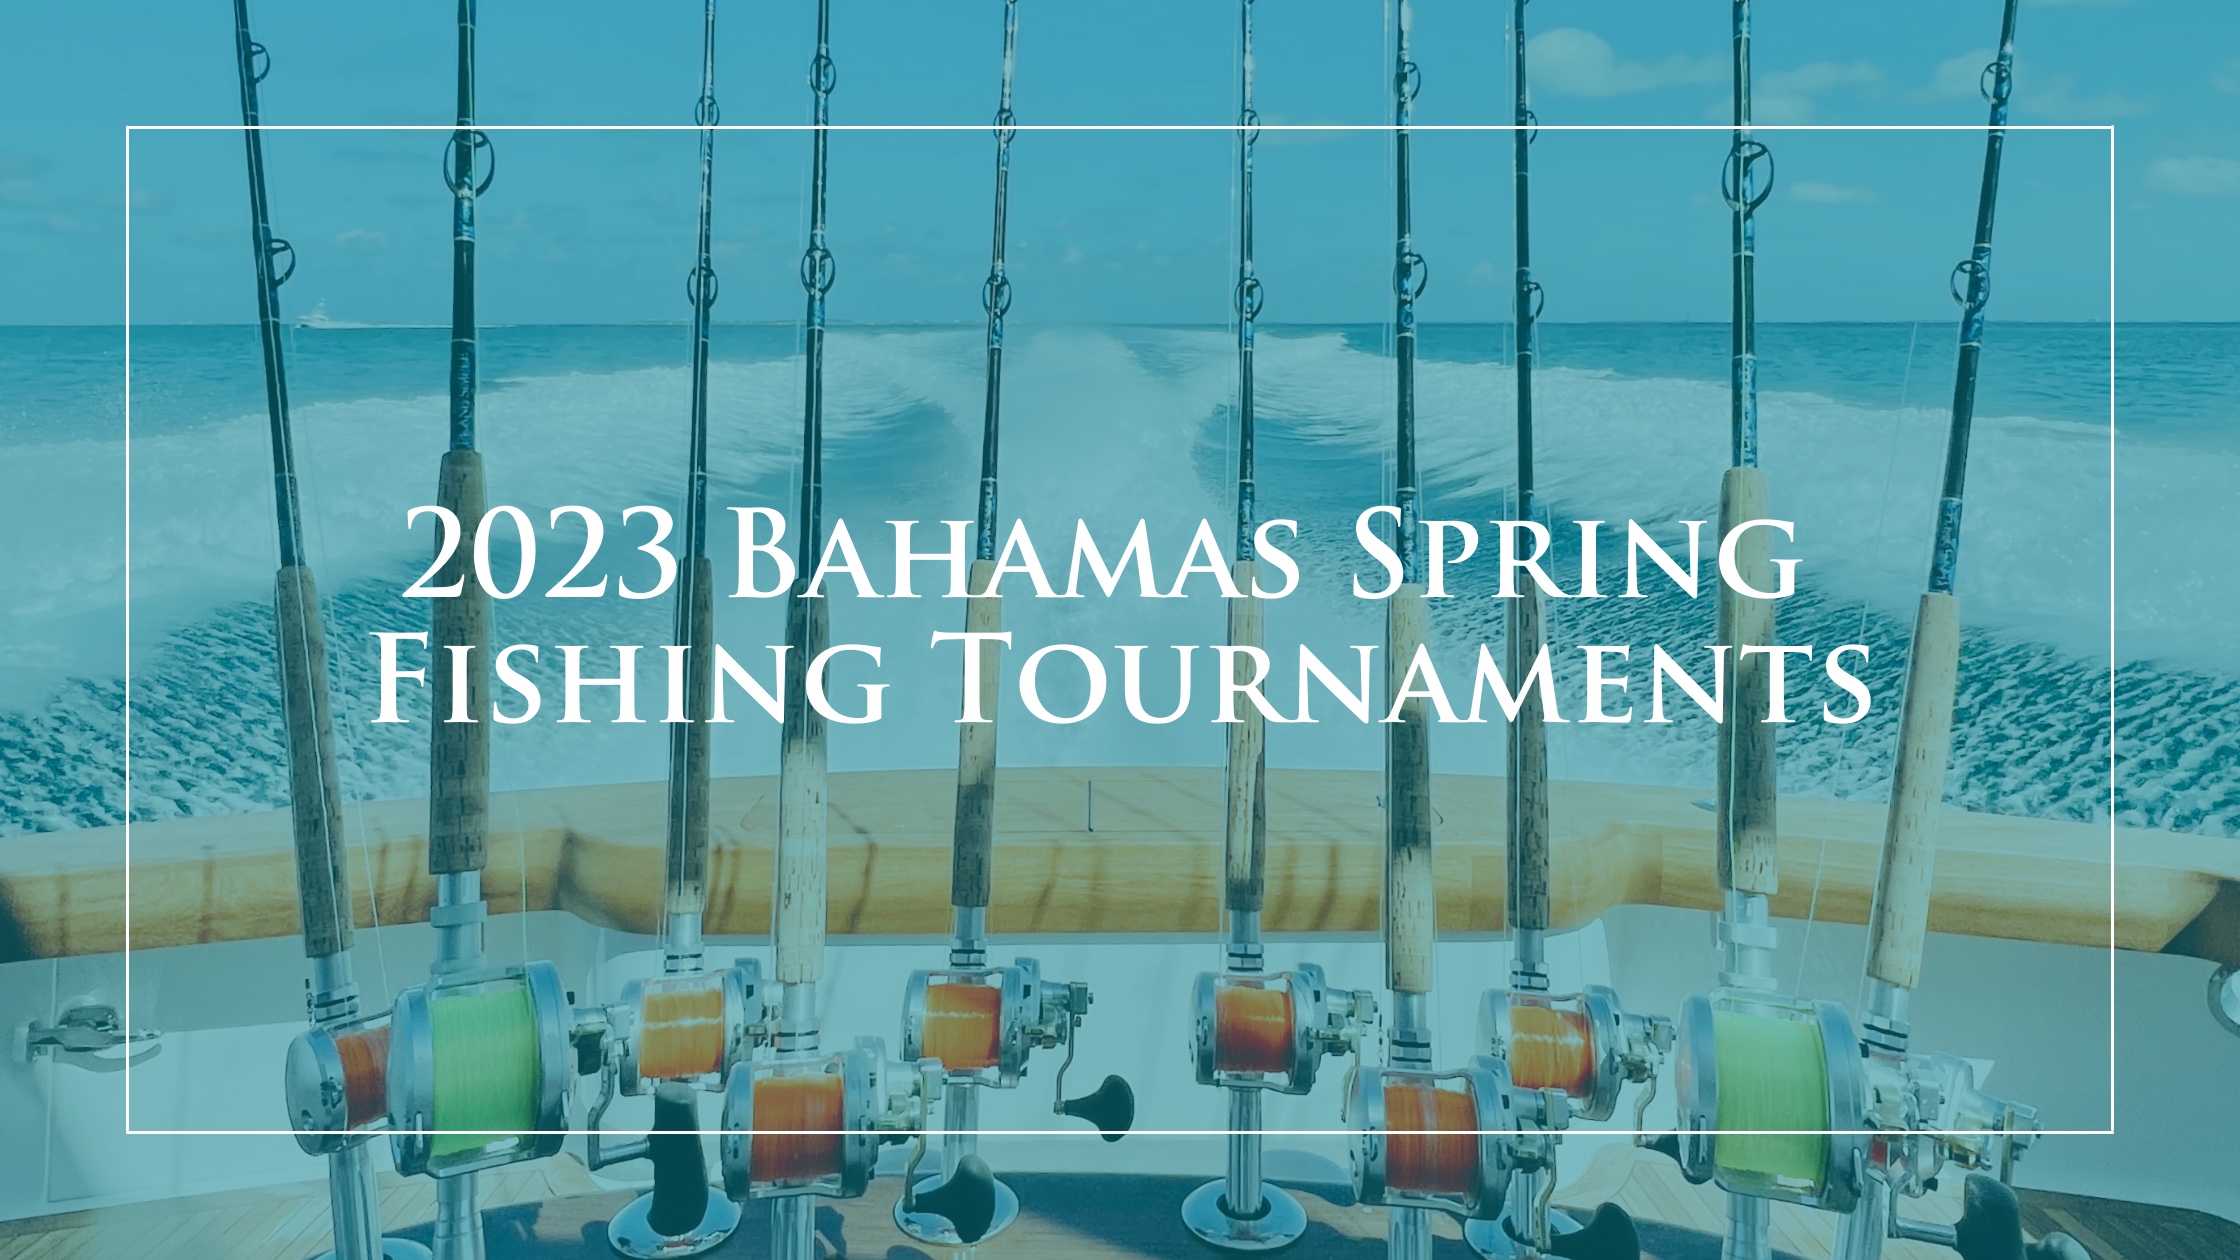 HMY a Proud Sponsor of the 2023 Skip Smith Bahamas Spring Fishing Tournaments